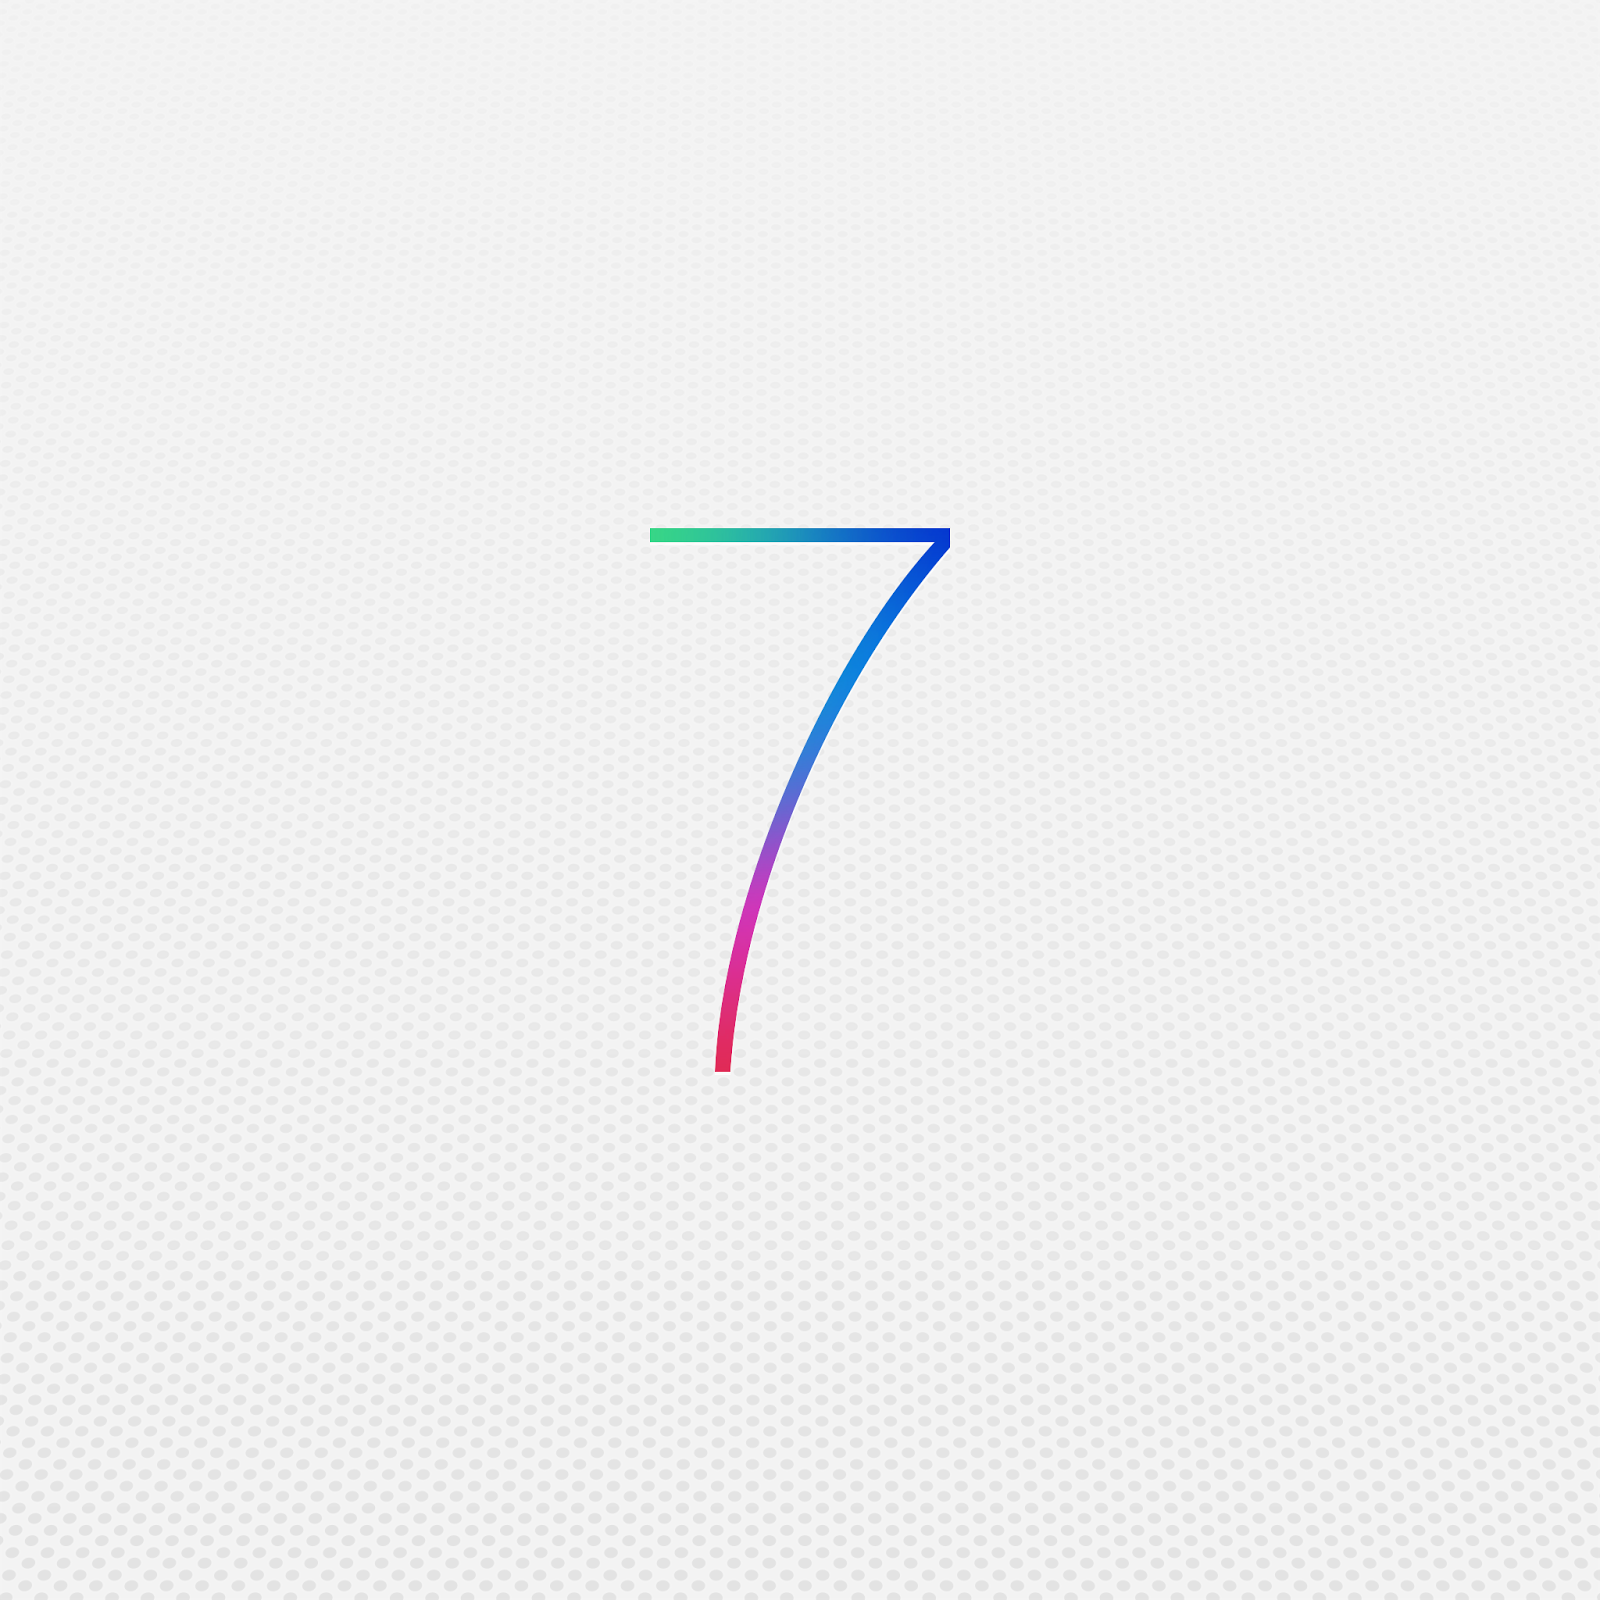 iOS 7 Wallpapers For Your iOS Device - Redsn0w, Redsnow Jailbreak 7 ...